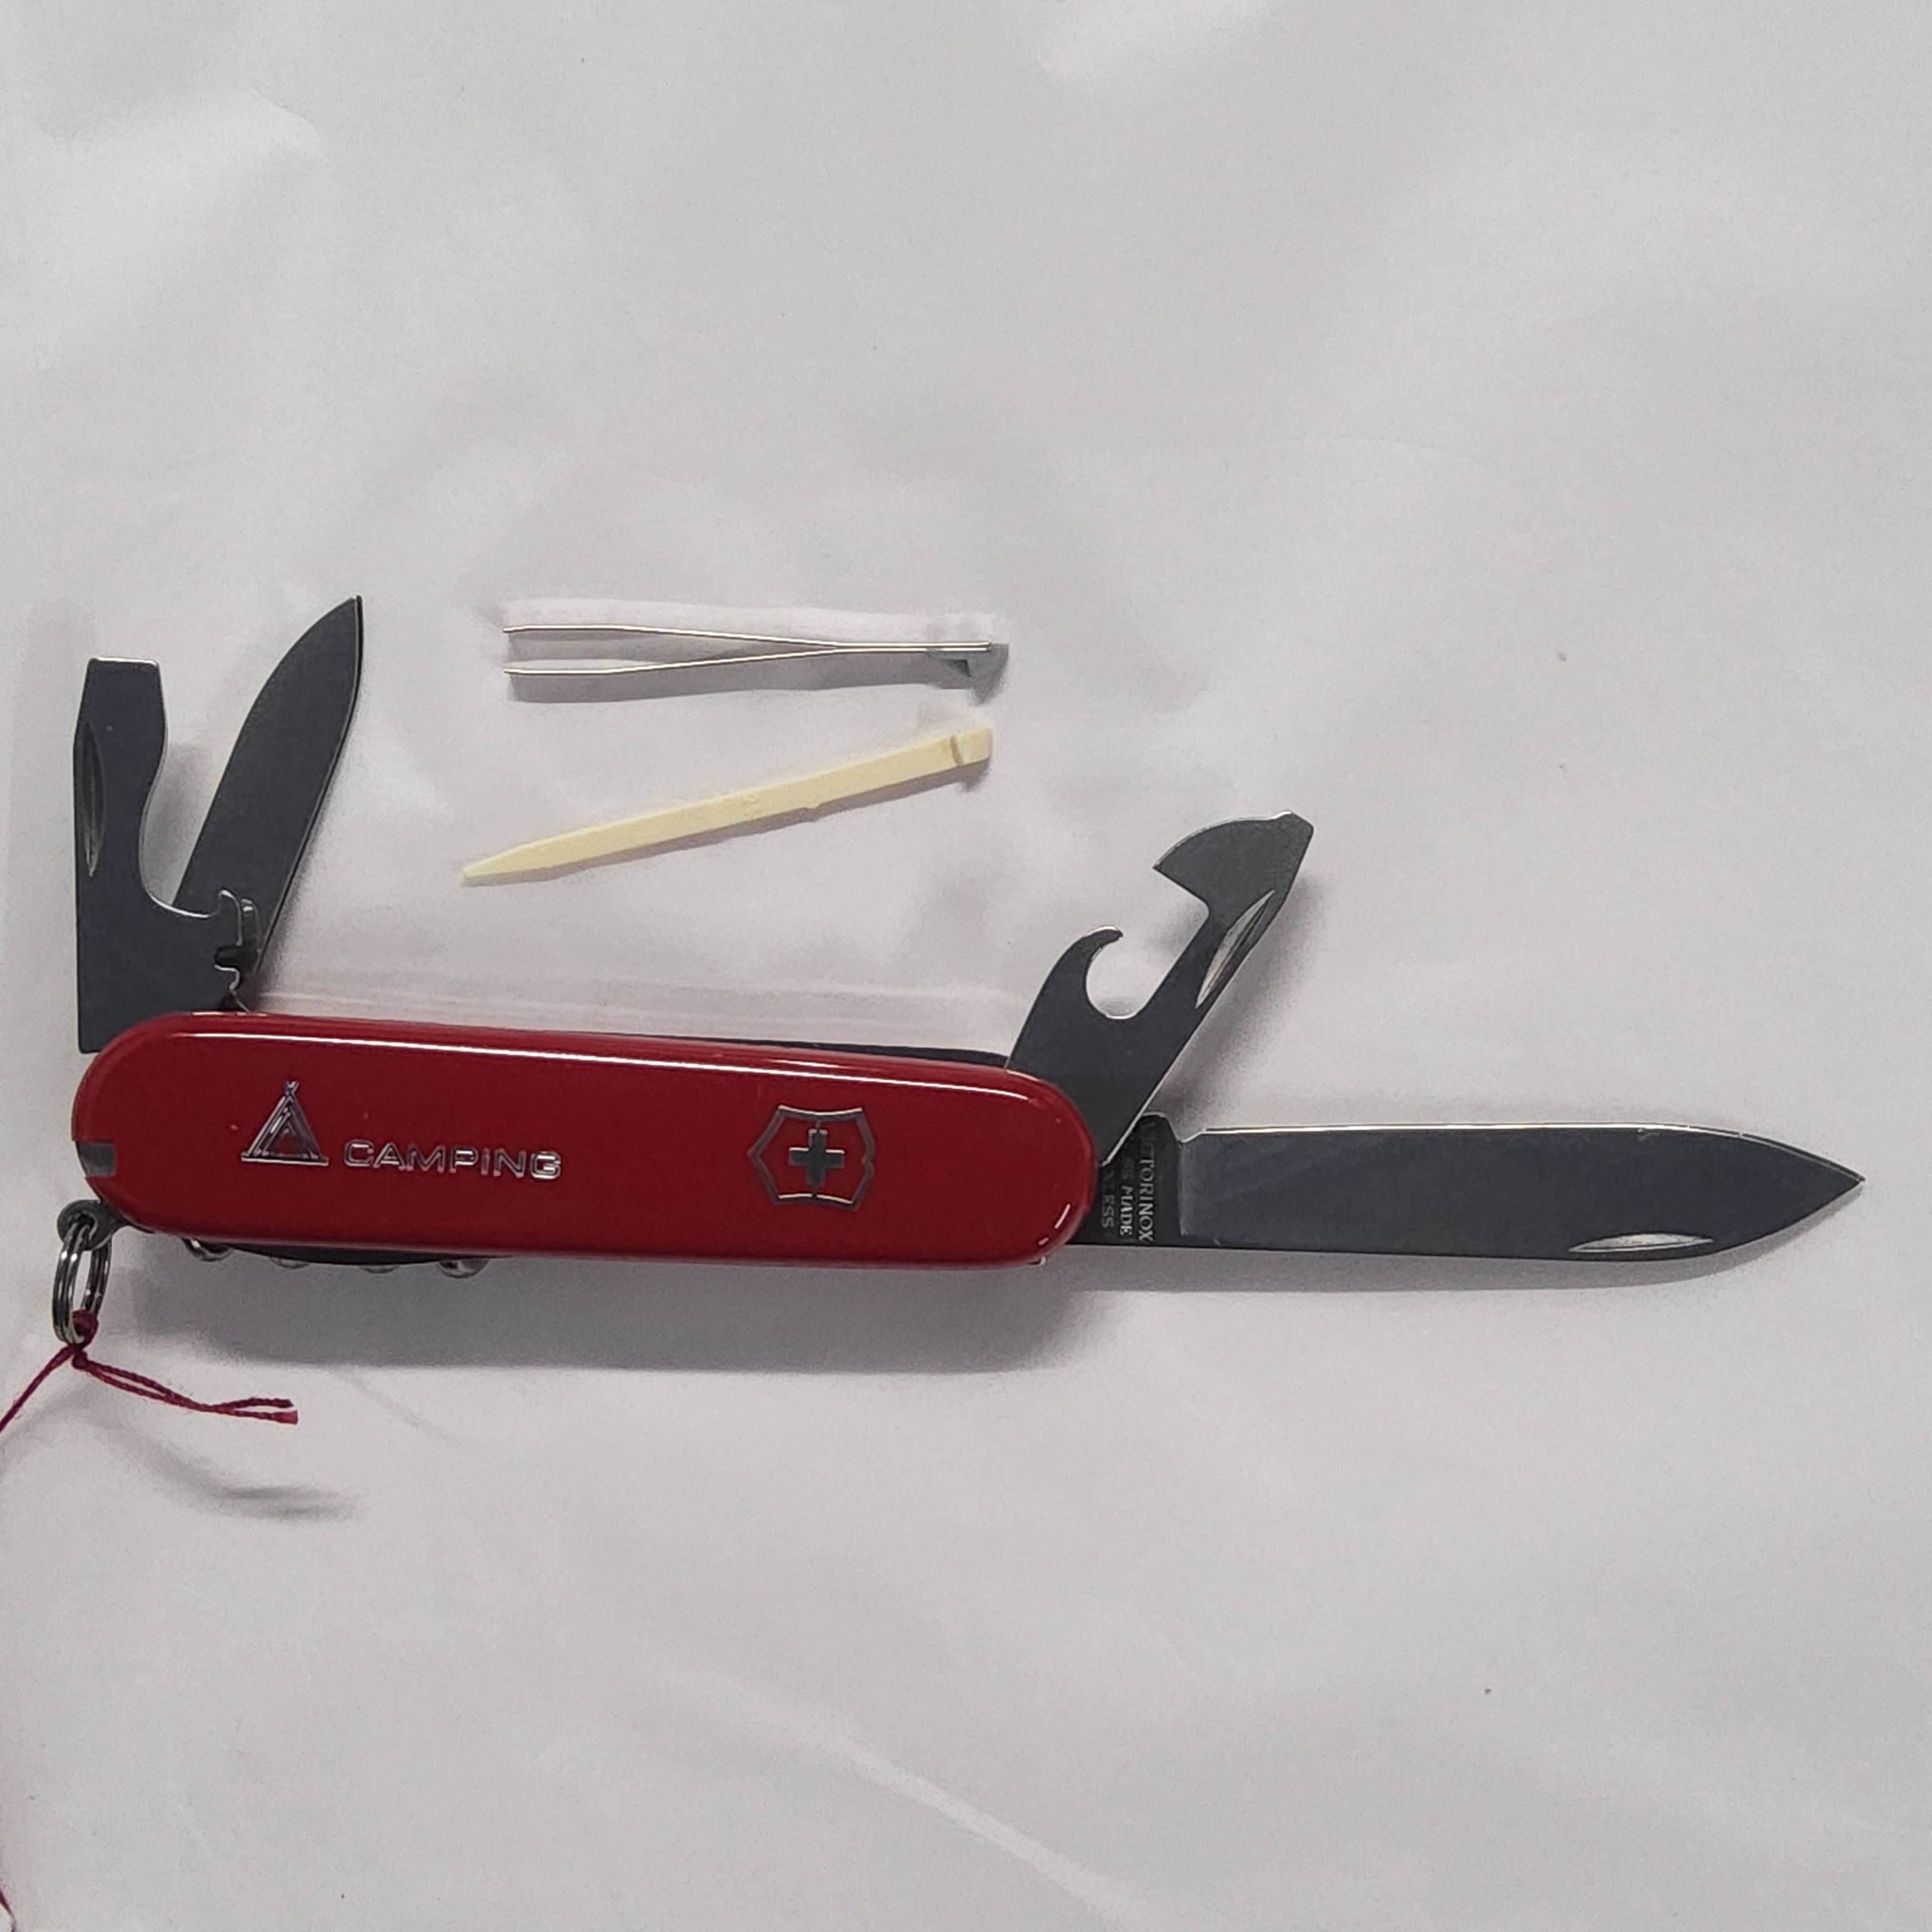 Swiss Army Knife - Camper - Red - 13 Functions - 91mm - 1.3613